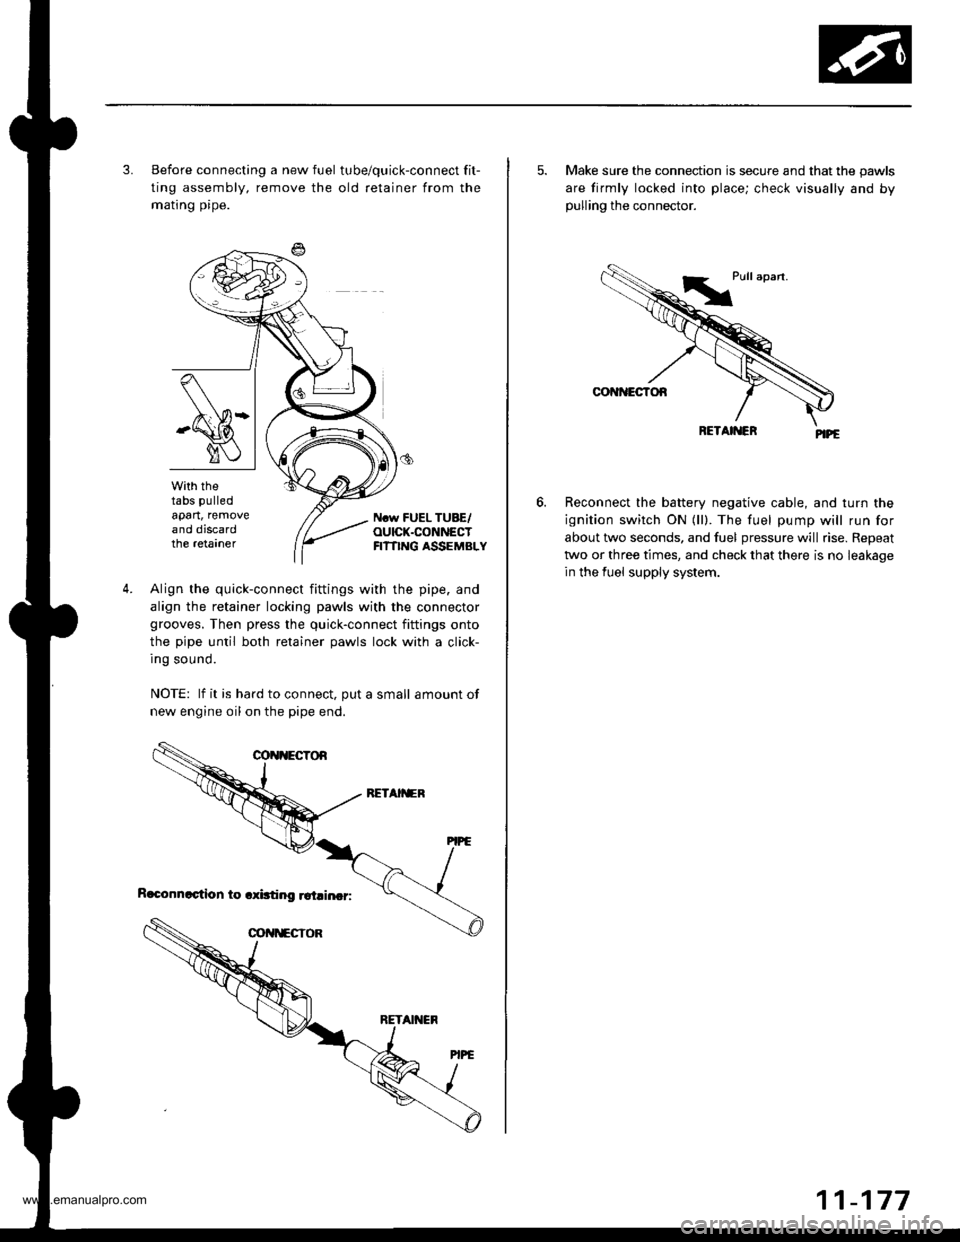 HONDA CR-V 1999 RD1-RD3 / 1.G Service Manual 
3. Before connecting a new fuel tube/quick-connect fit-
ting assembly, remove the old retainer from the
mating pipe.
with thetabs pulled
apart, removeand discardthe retarner
Ncw FUEL TUBE/OUICK.CONNE